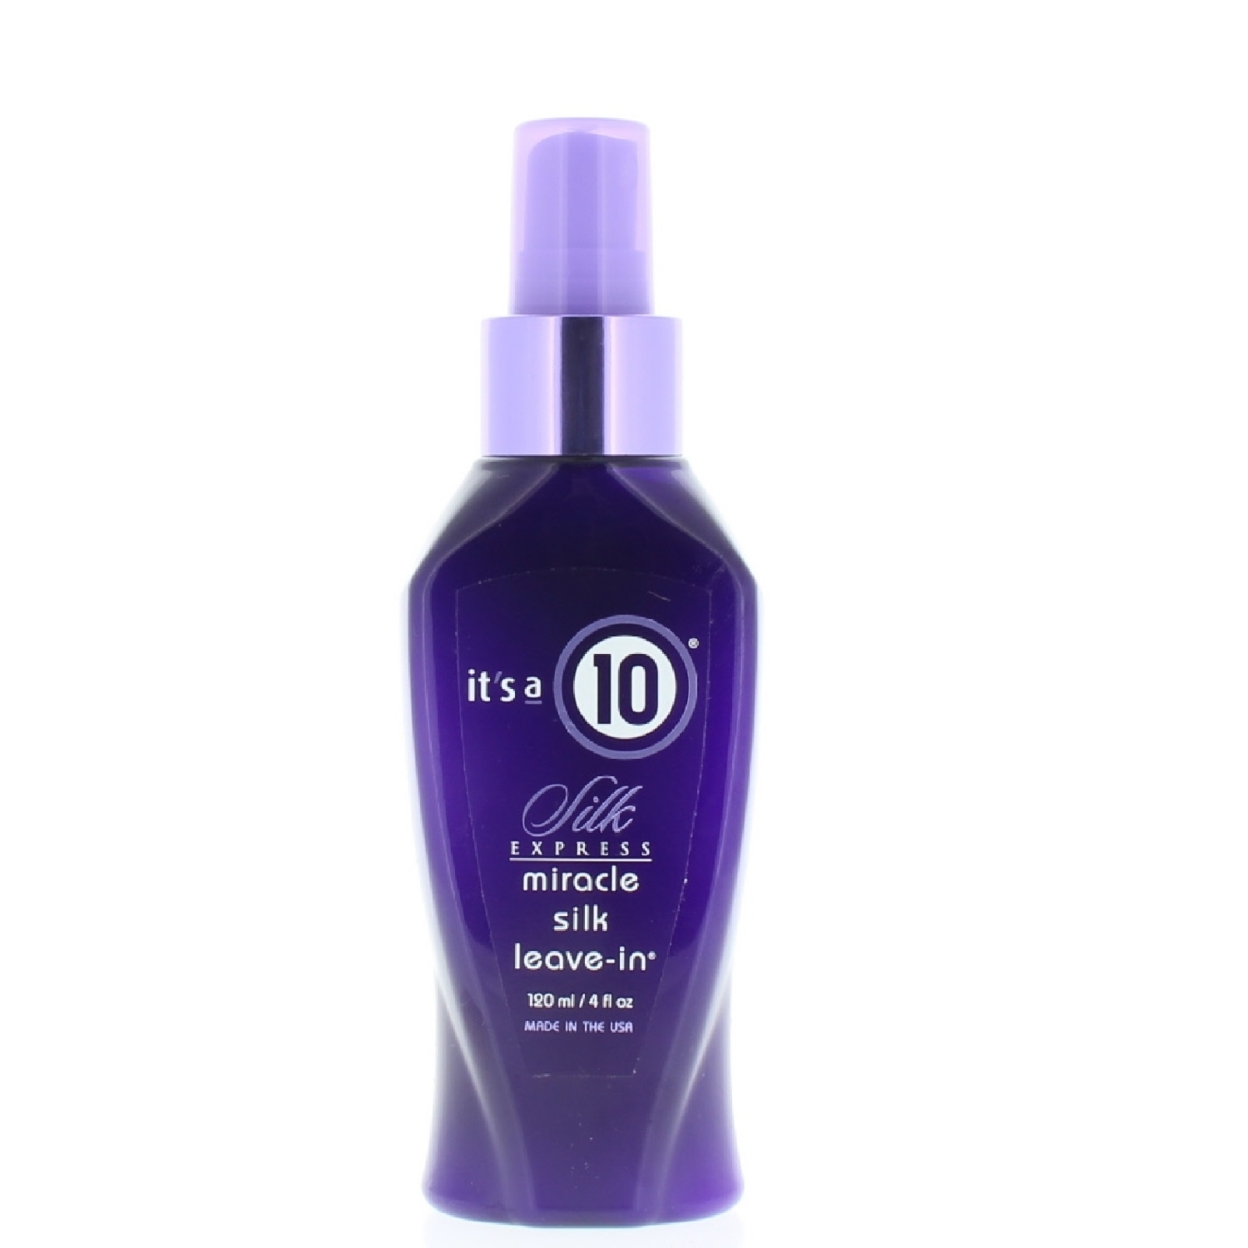 It's A 10 Silk Express Miracle Silk Leave In 4oz/120ml